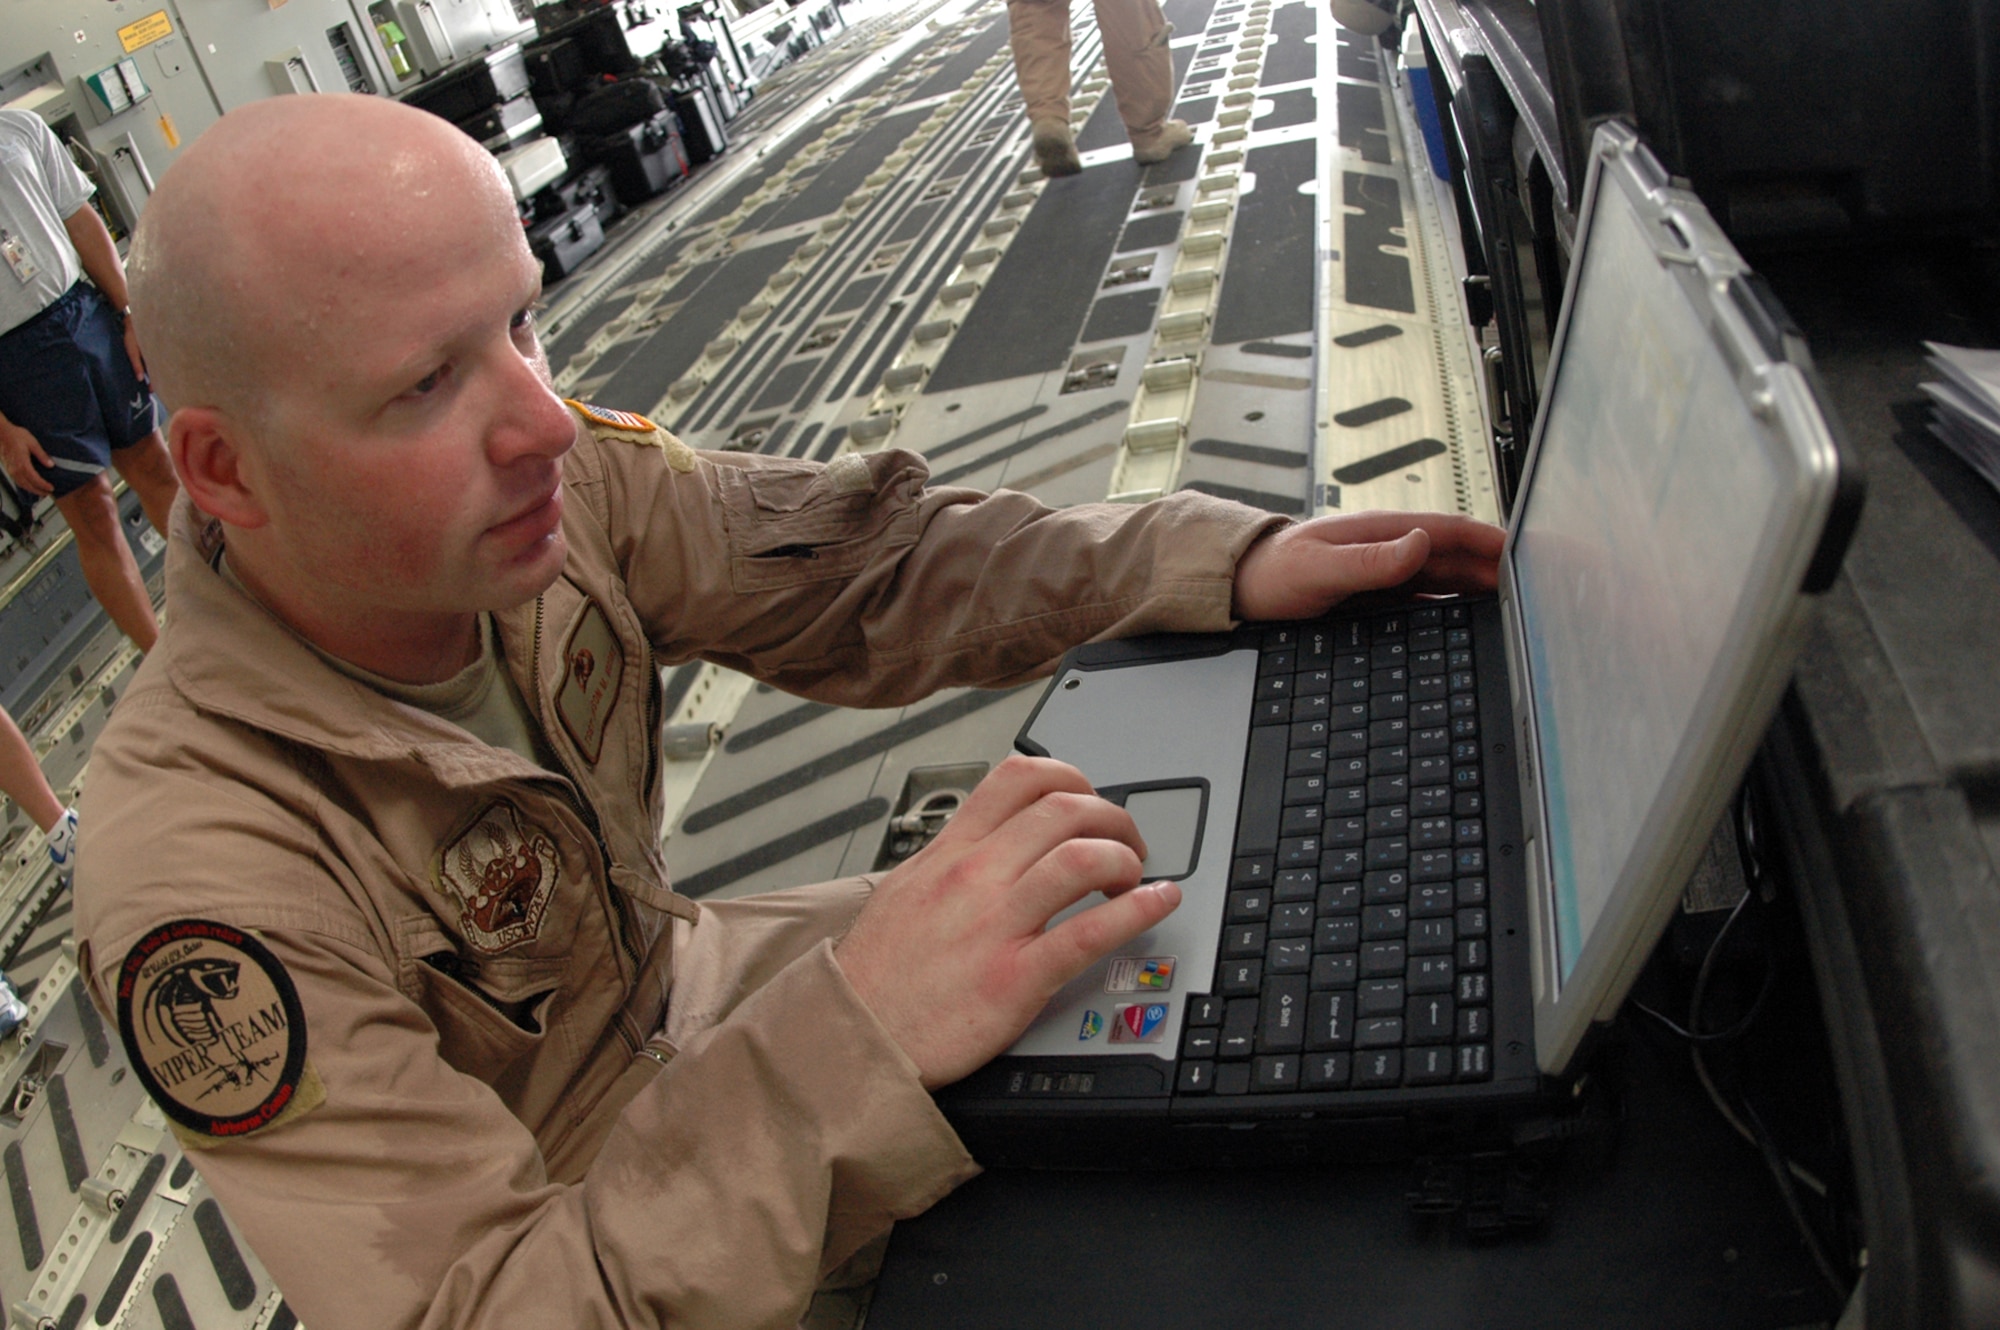 Tech. Sgt. Jason Moore, 379th Expeditionary Communications Squadron Viper Team member, uses a laptop to set up communications equipment aboard a C-17 before a mission Aug. 25. (U.S. Air Force photo by Senior Airman Clark Staehle)